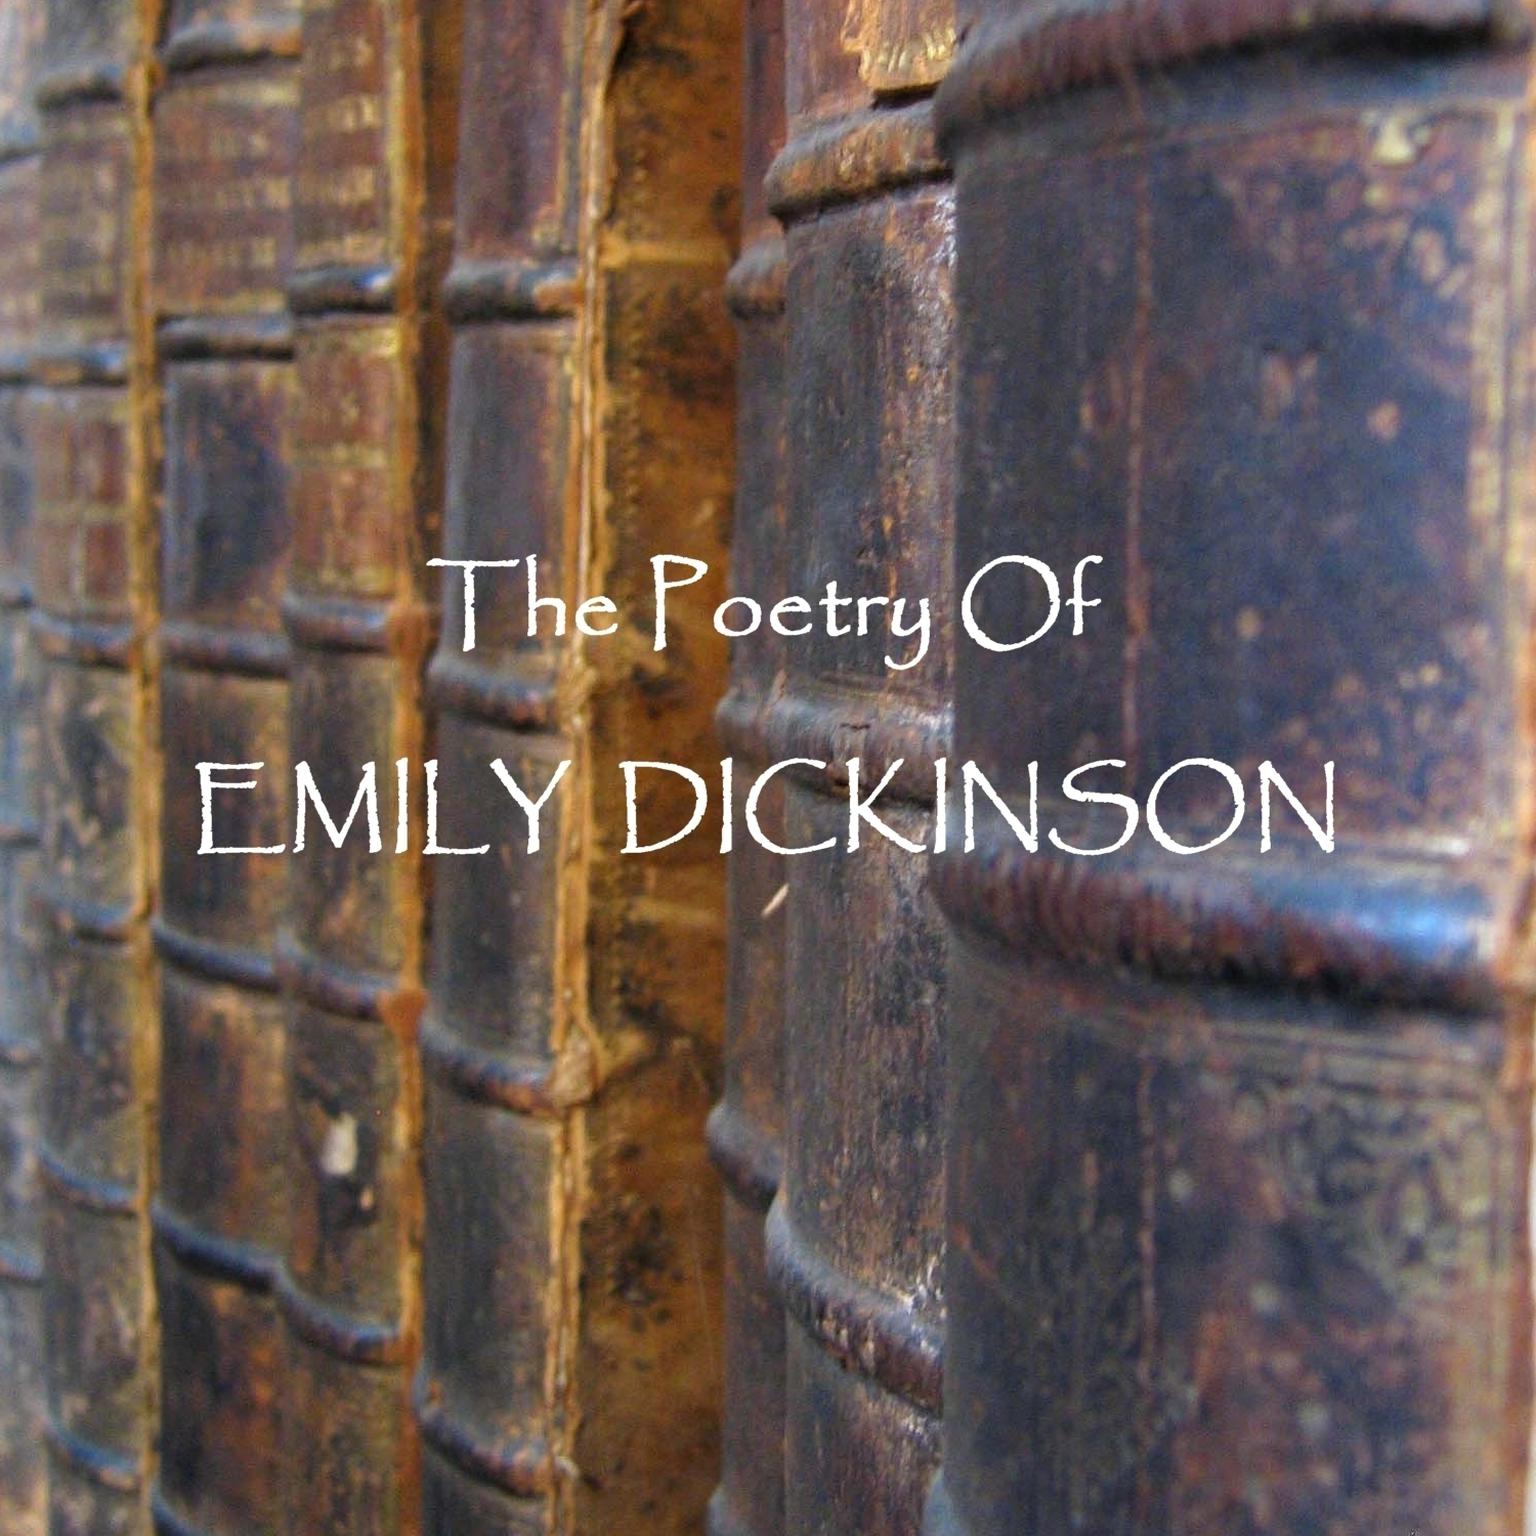 The Poetry of Emily Dickinson (Abridged) Audiobook, by Emily Dickinson